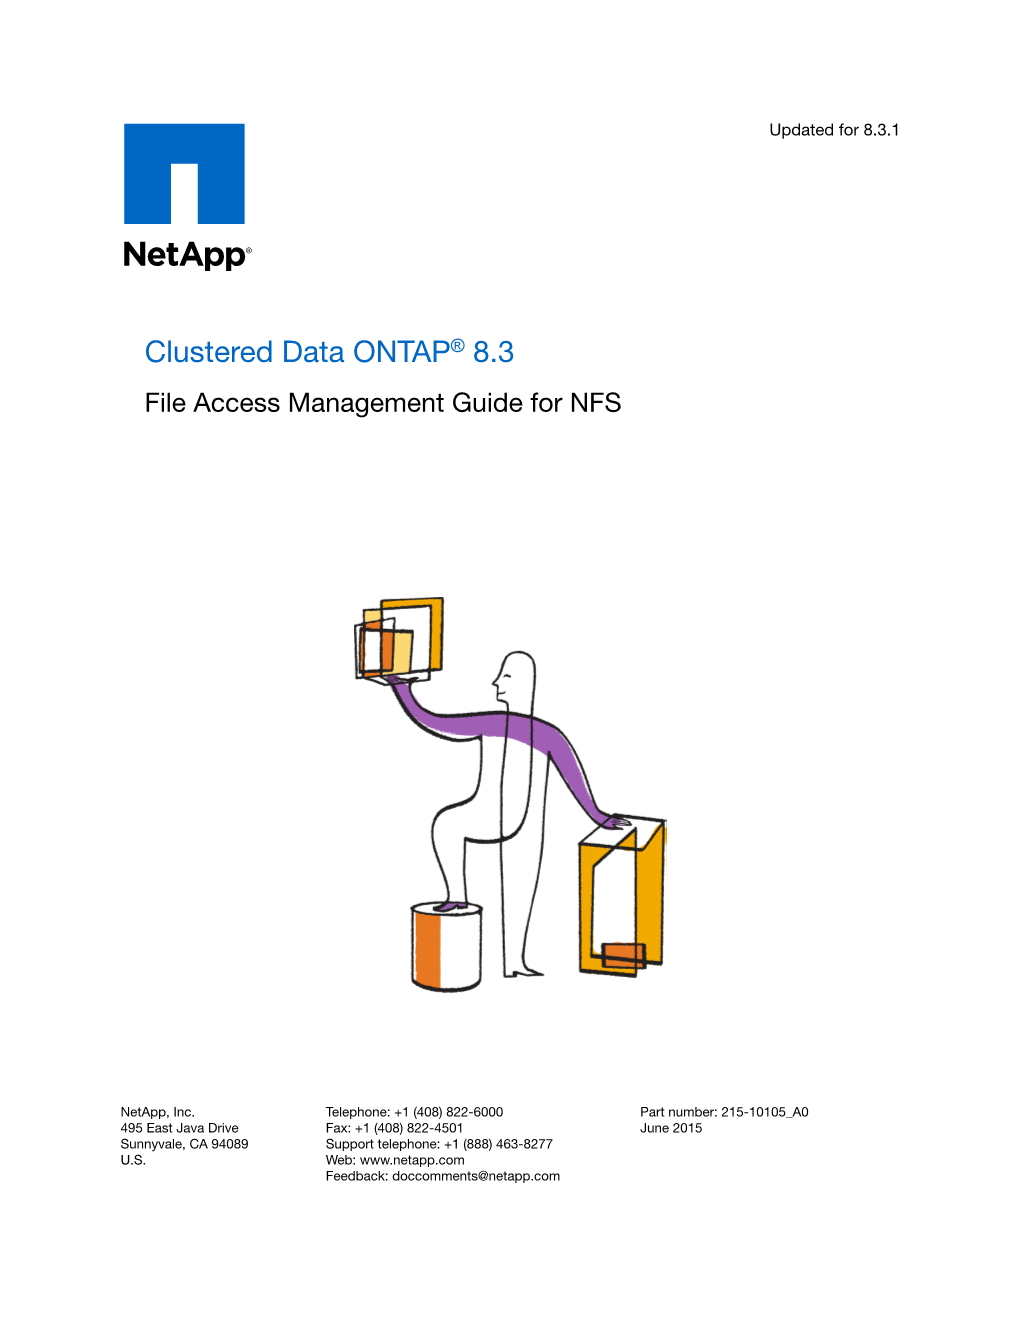 Clustered Data ONTAP® 8.3 File Access Management Guide for NFS